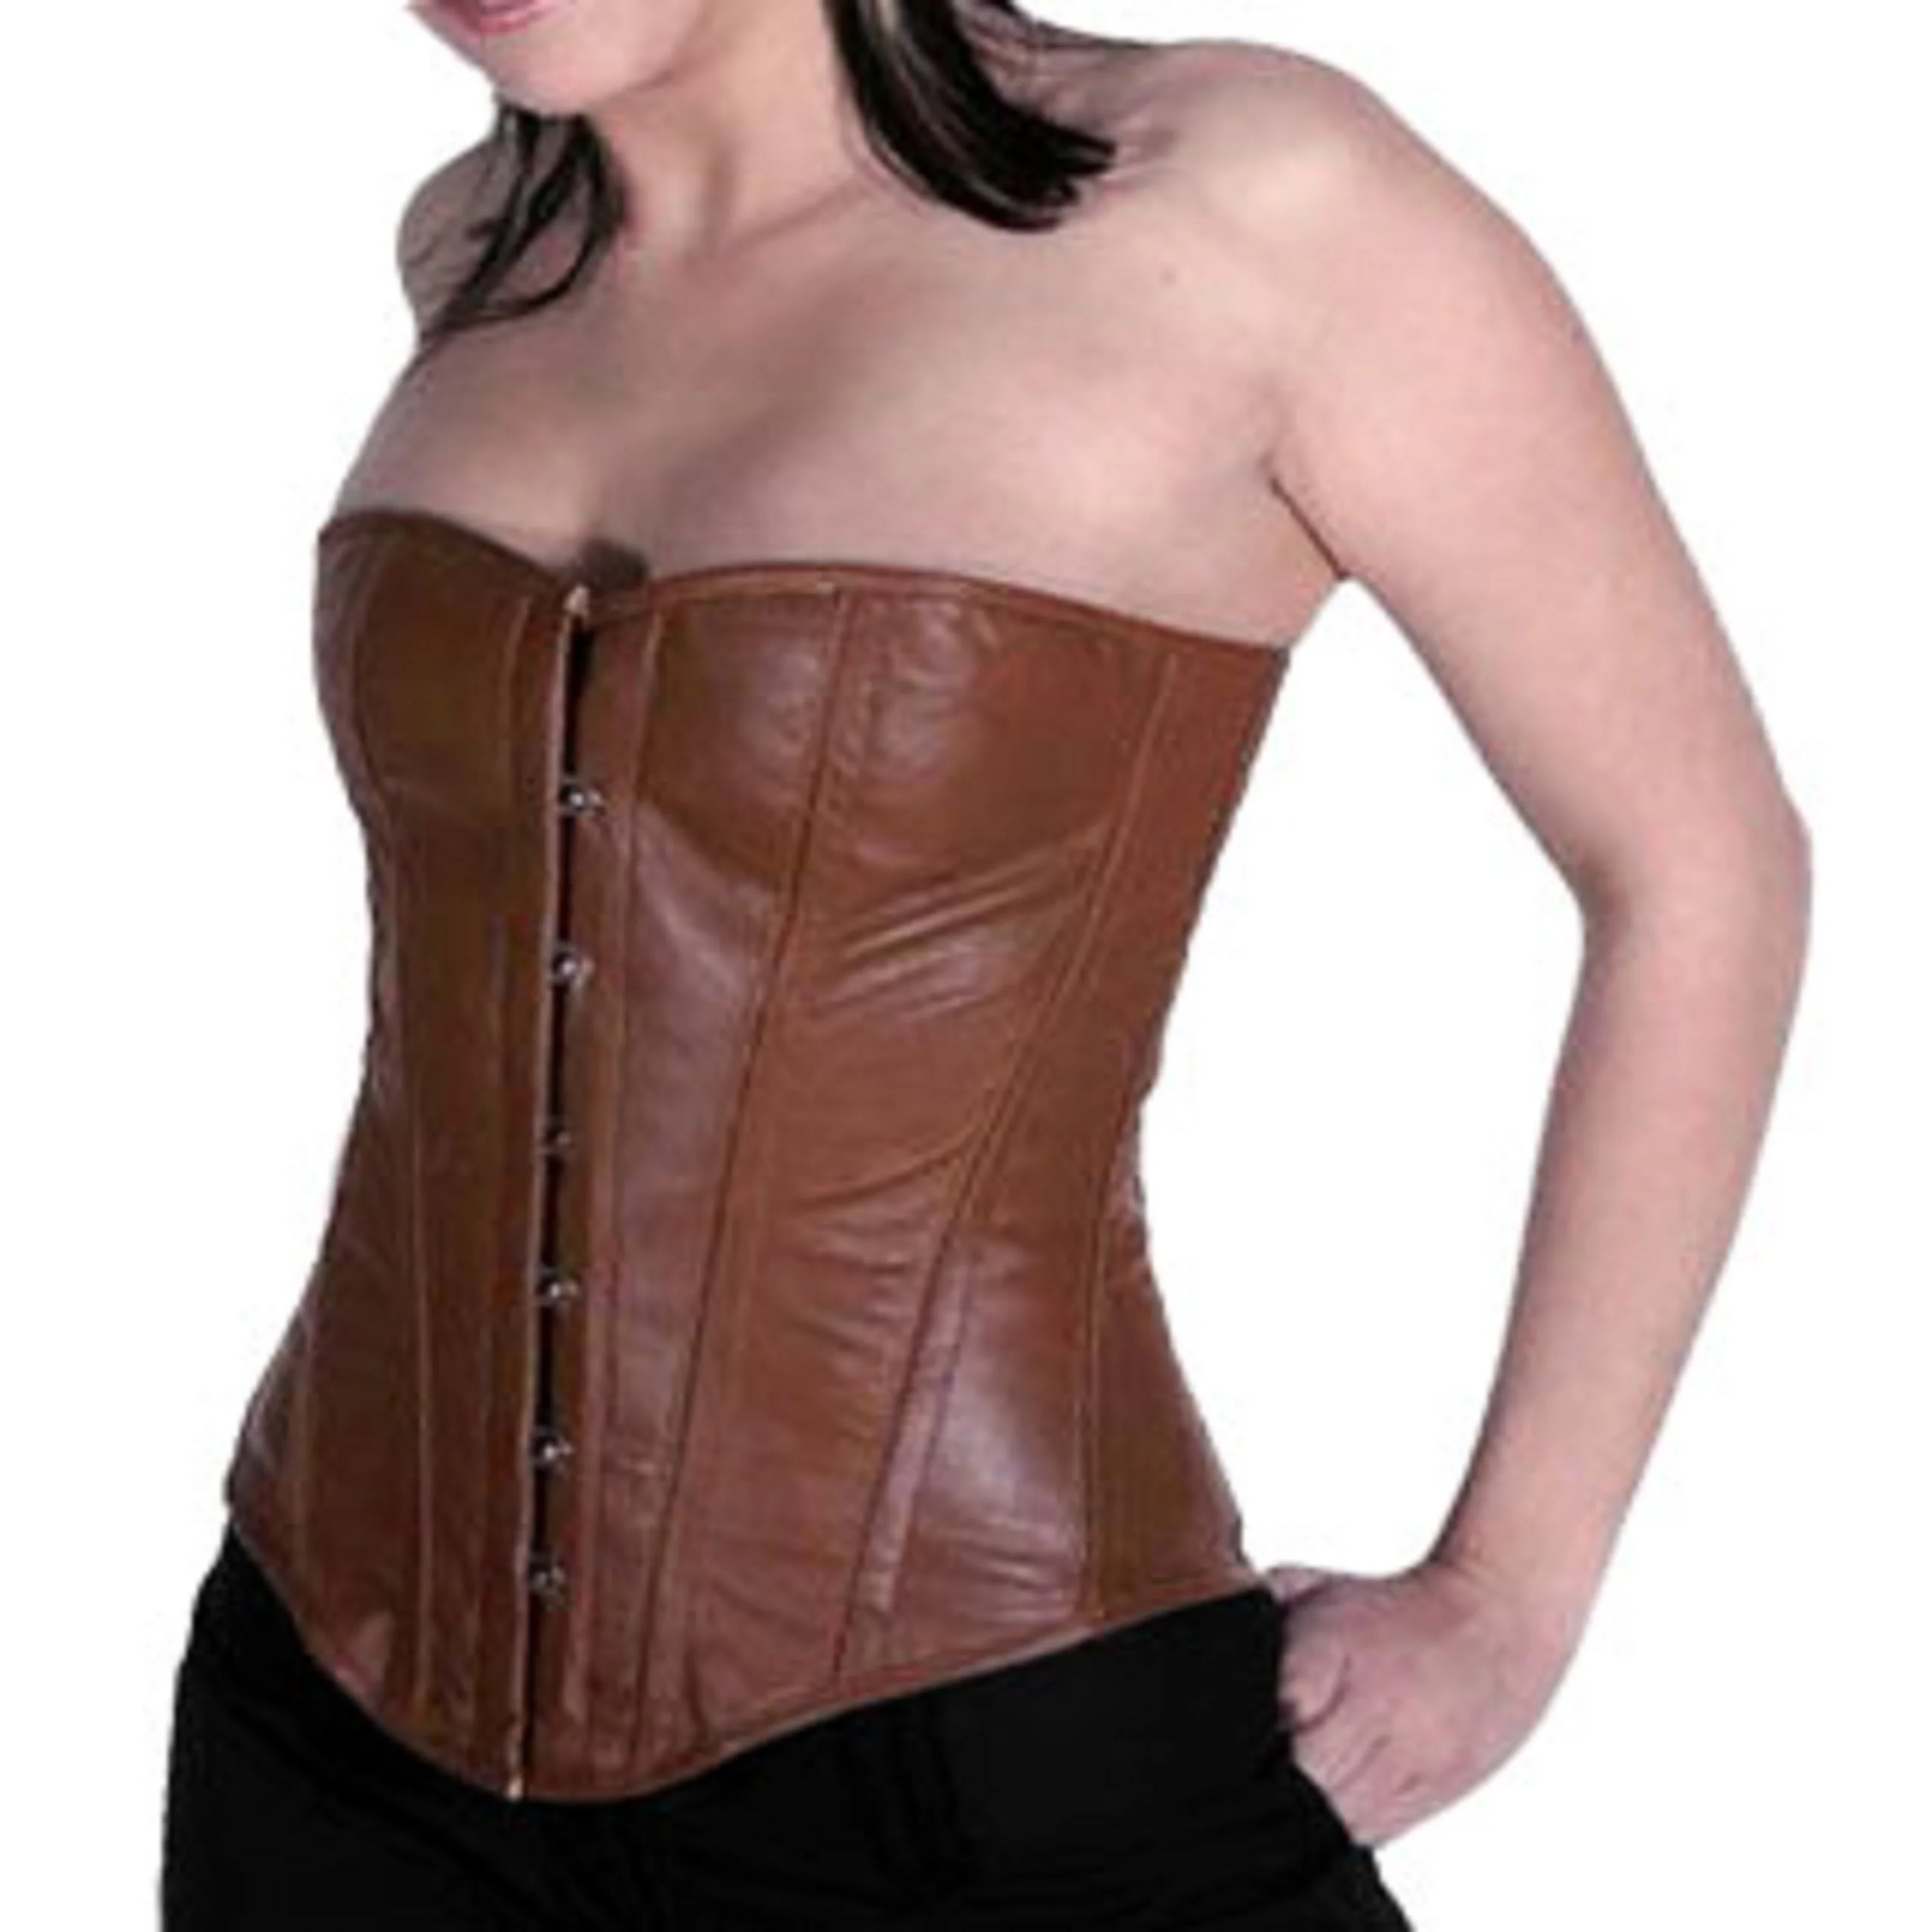 Sexy Women Leather Porn - Over-bust Sized Leather Corset Ladies Product Ladies Toper Sexy Hot Erotic  Underwear Women Leather Corsets Latex Porn Baby Doll - Buy Leather Corset  Tops Women Size Women Underwear Bra Women Sexy Underwear